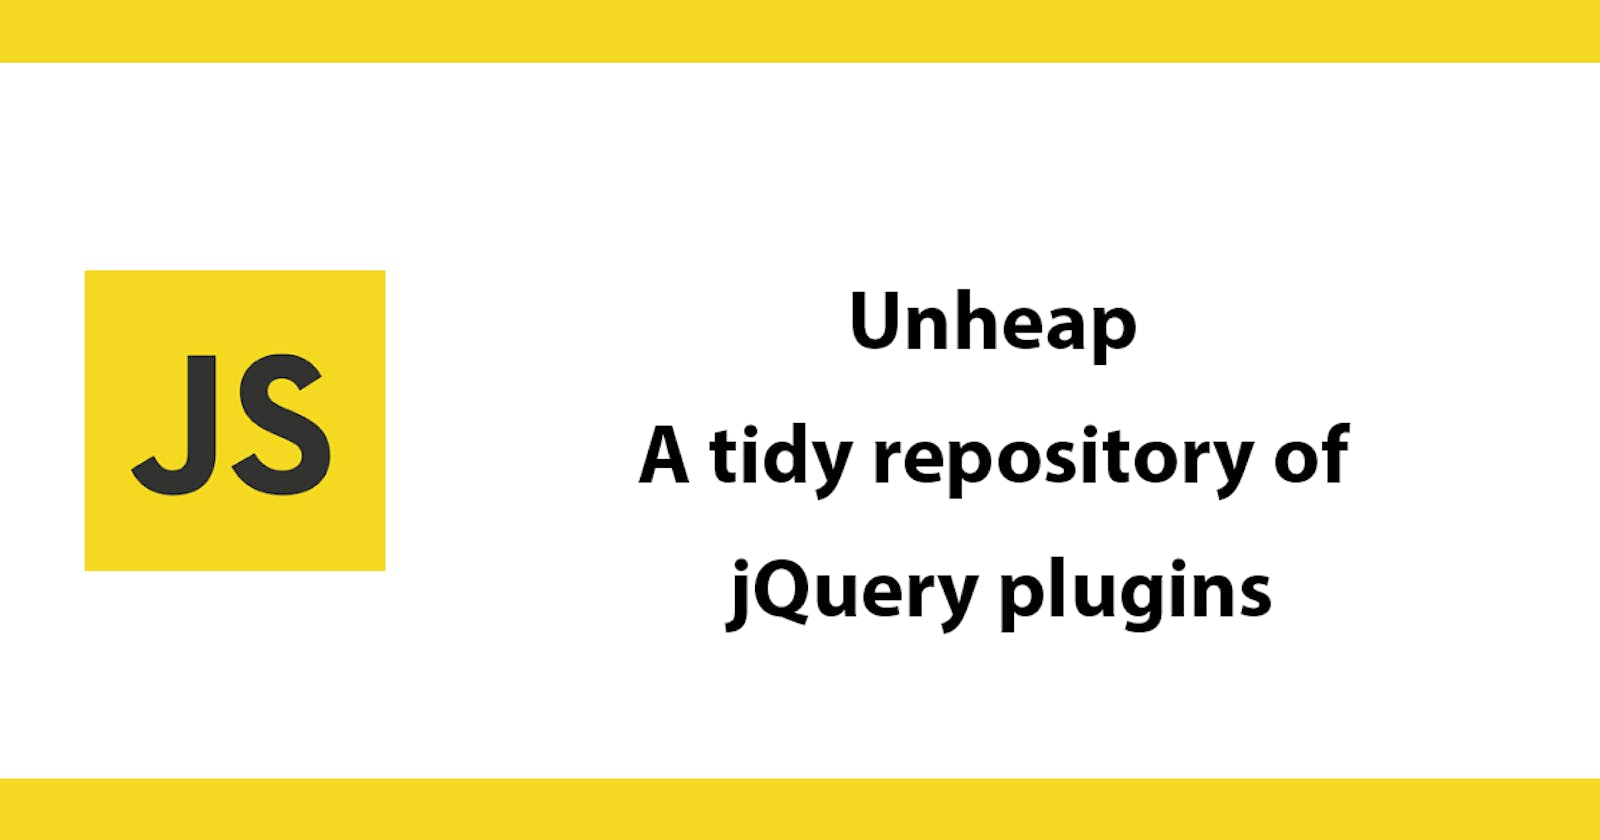 Unheap - A tidy repository of jQuery plugins